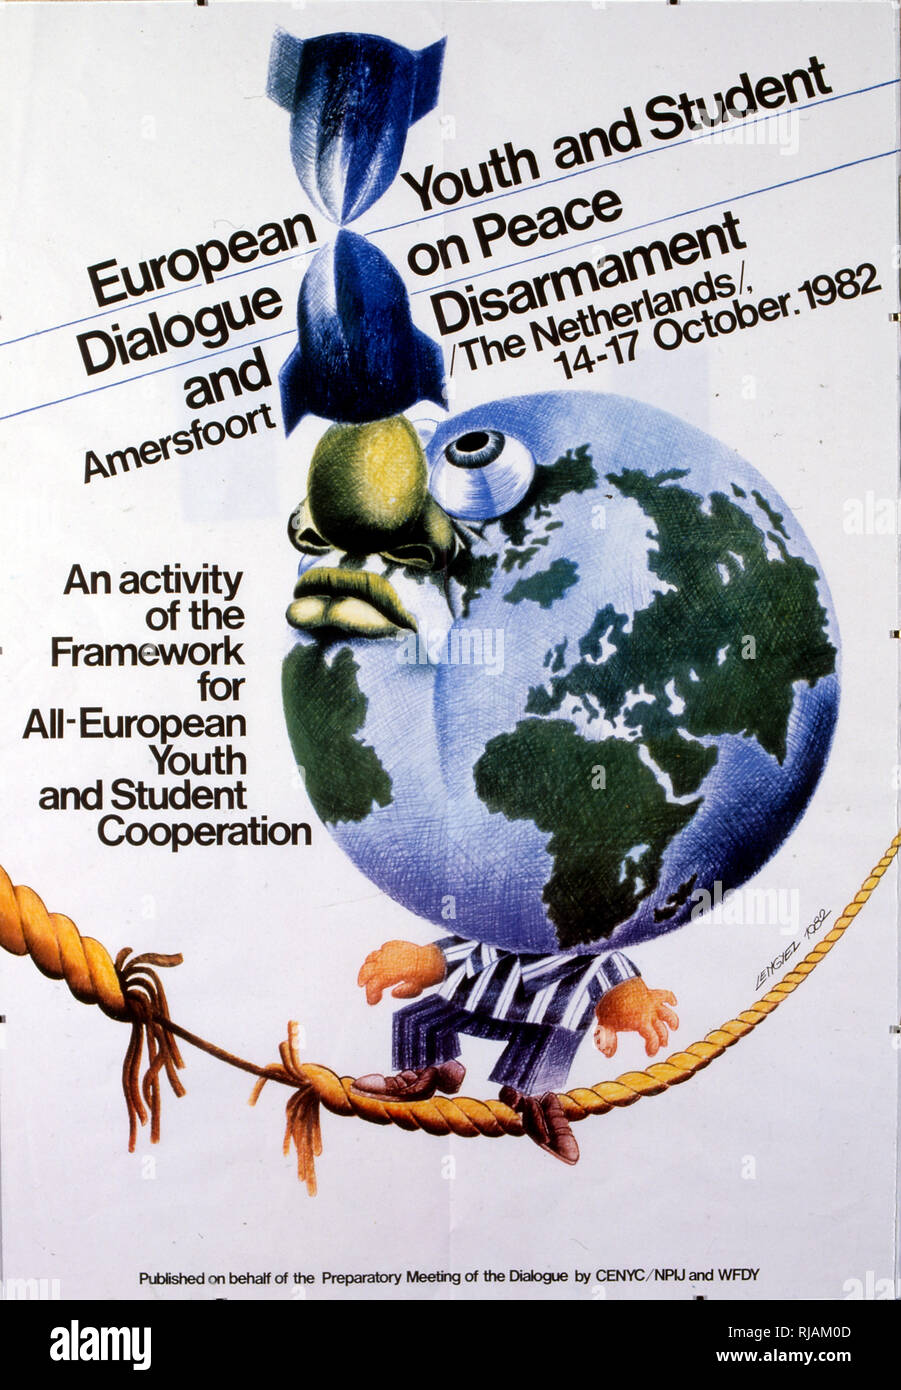 European Youth and Student Dialogue on Peace and Disarmament, held in Amersfoort from 14 to 17 October 1982, Poster Stock Photo